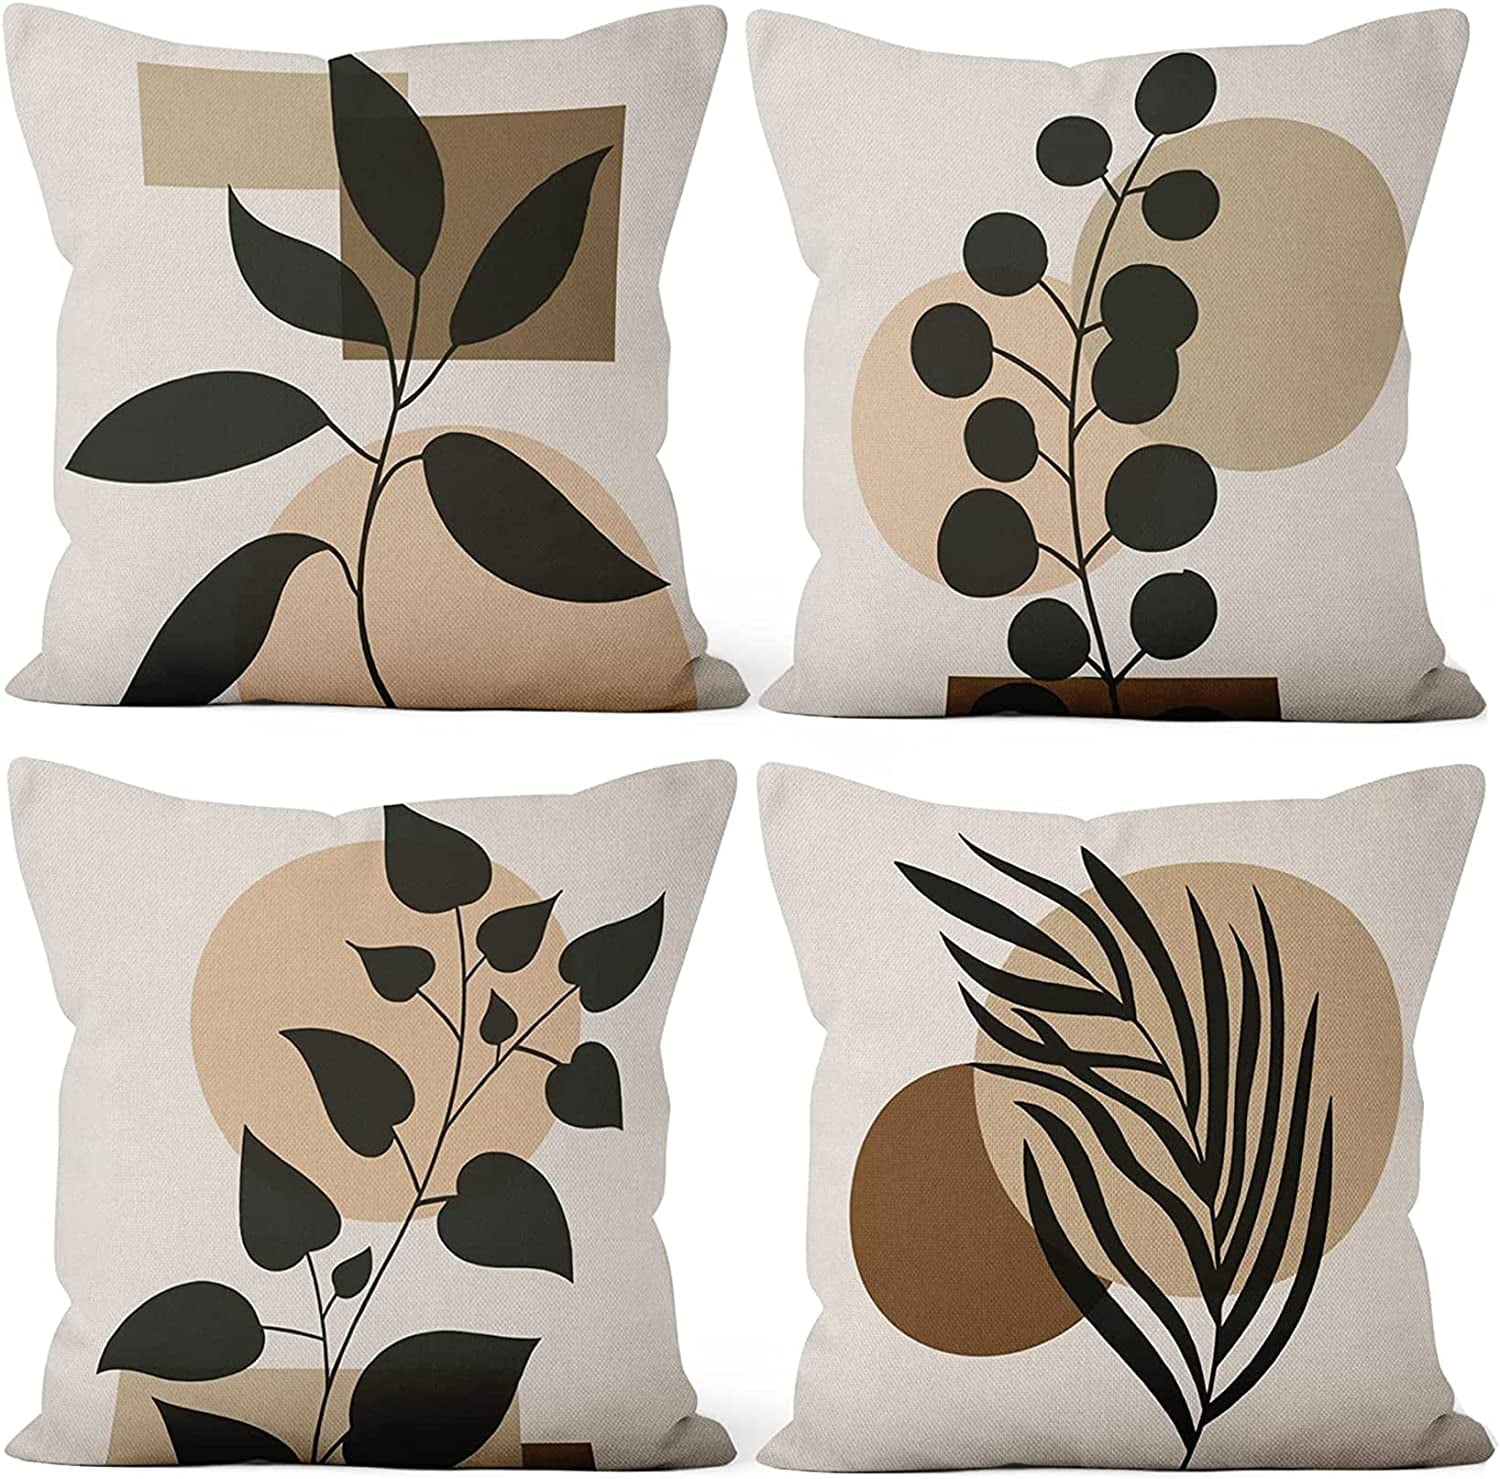 CDWERD Boho Throw Pillow Covers 18x18 Inch Set of 4 Boho Modern Farmhouse  Neutral Decorative Pillowcases Faux Leather and Linen Cushion Case for